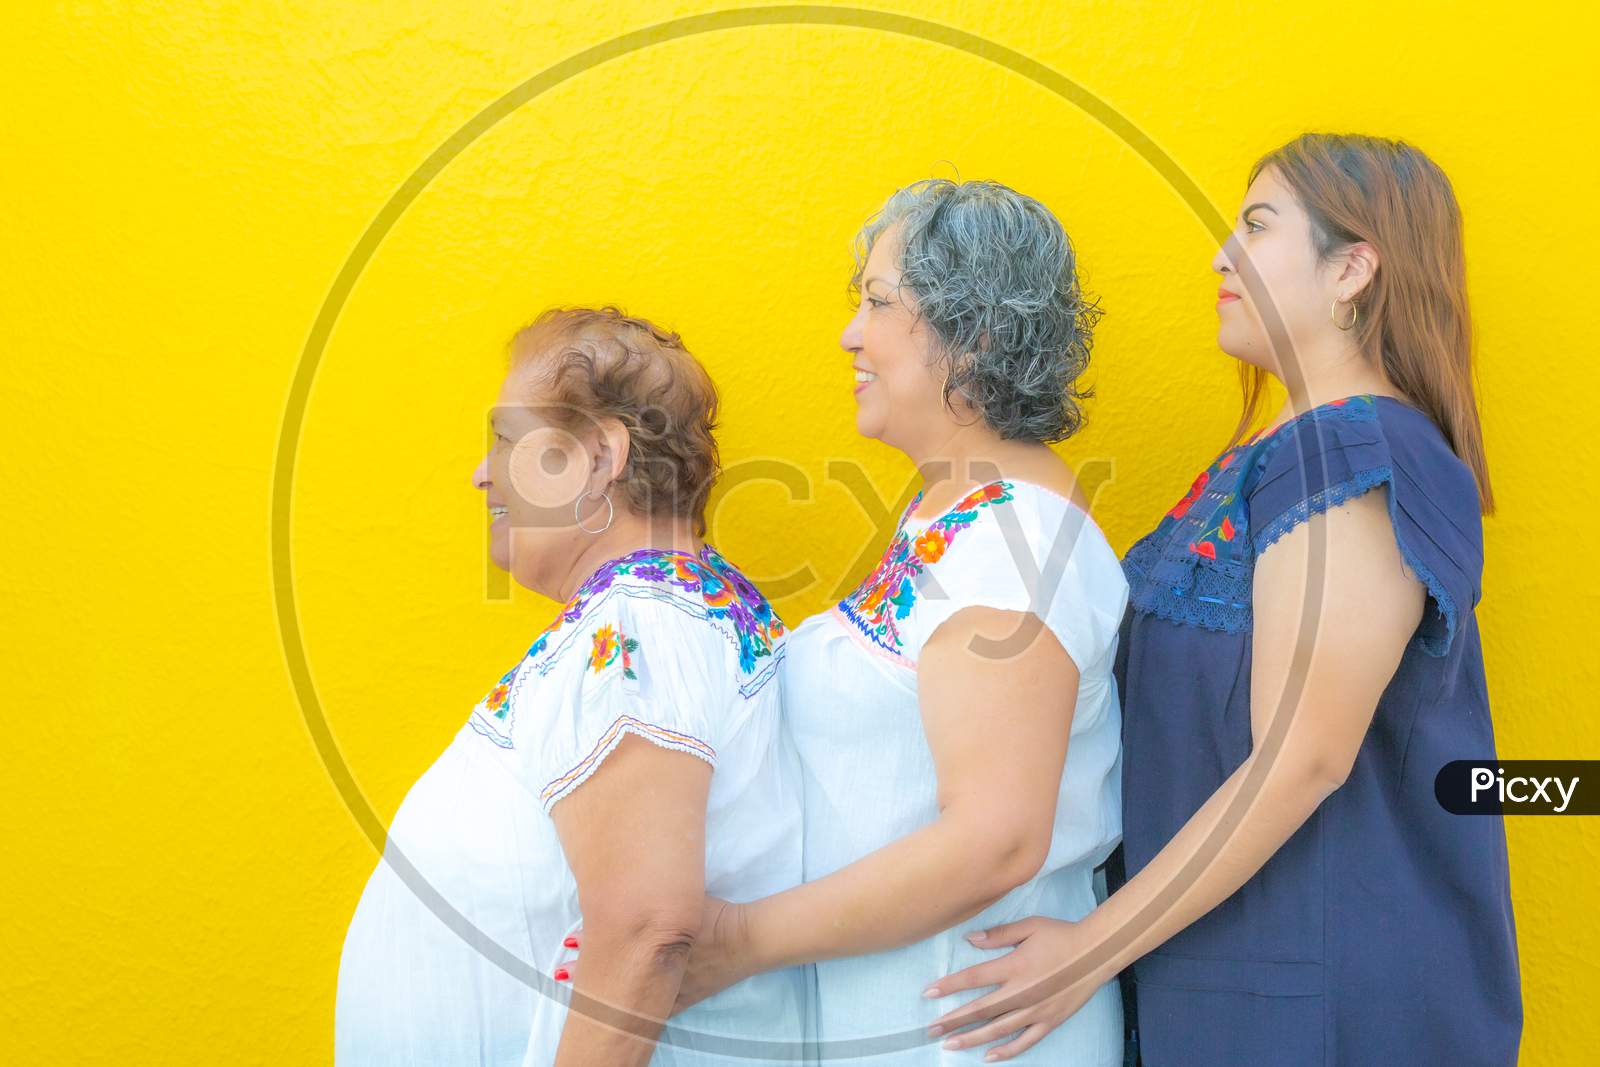 Side View Profiles Of Grandmother, Daughter And Granddaughter, Three Generations Of Mexican Women Smiling With Floral Print Blouses In A Row On A Yellow Background